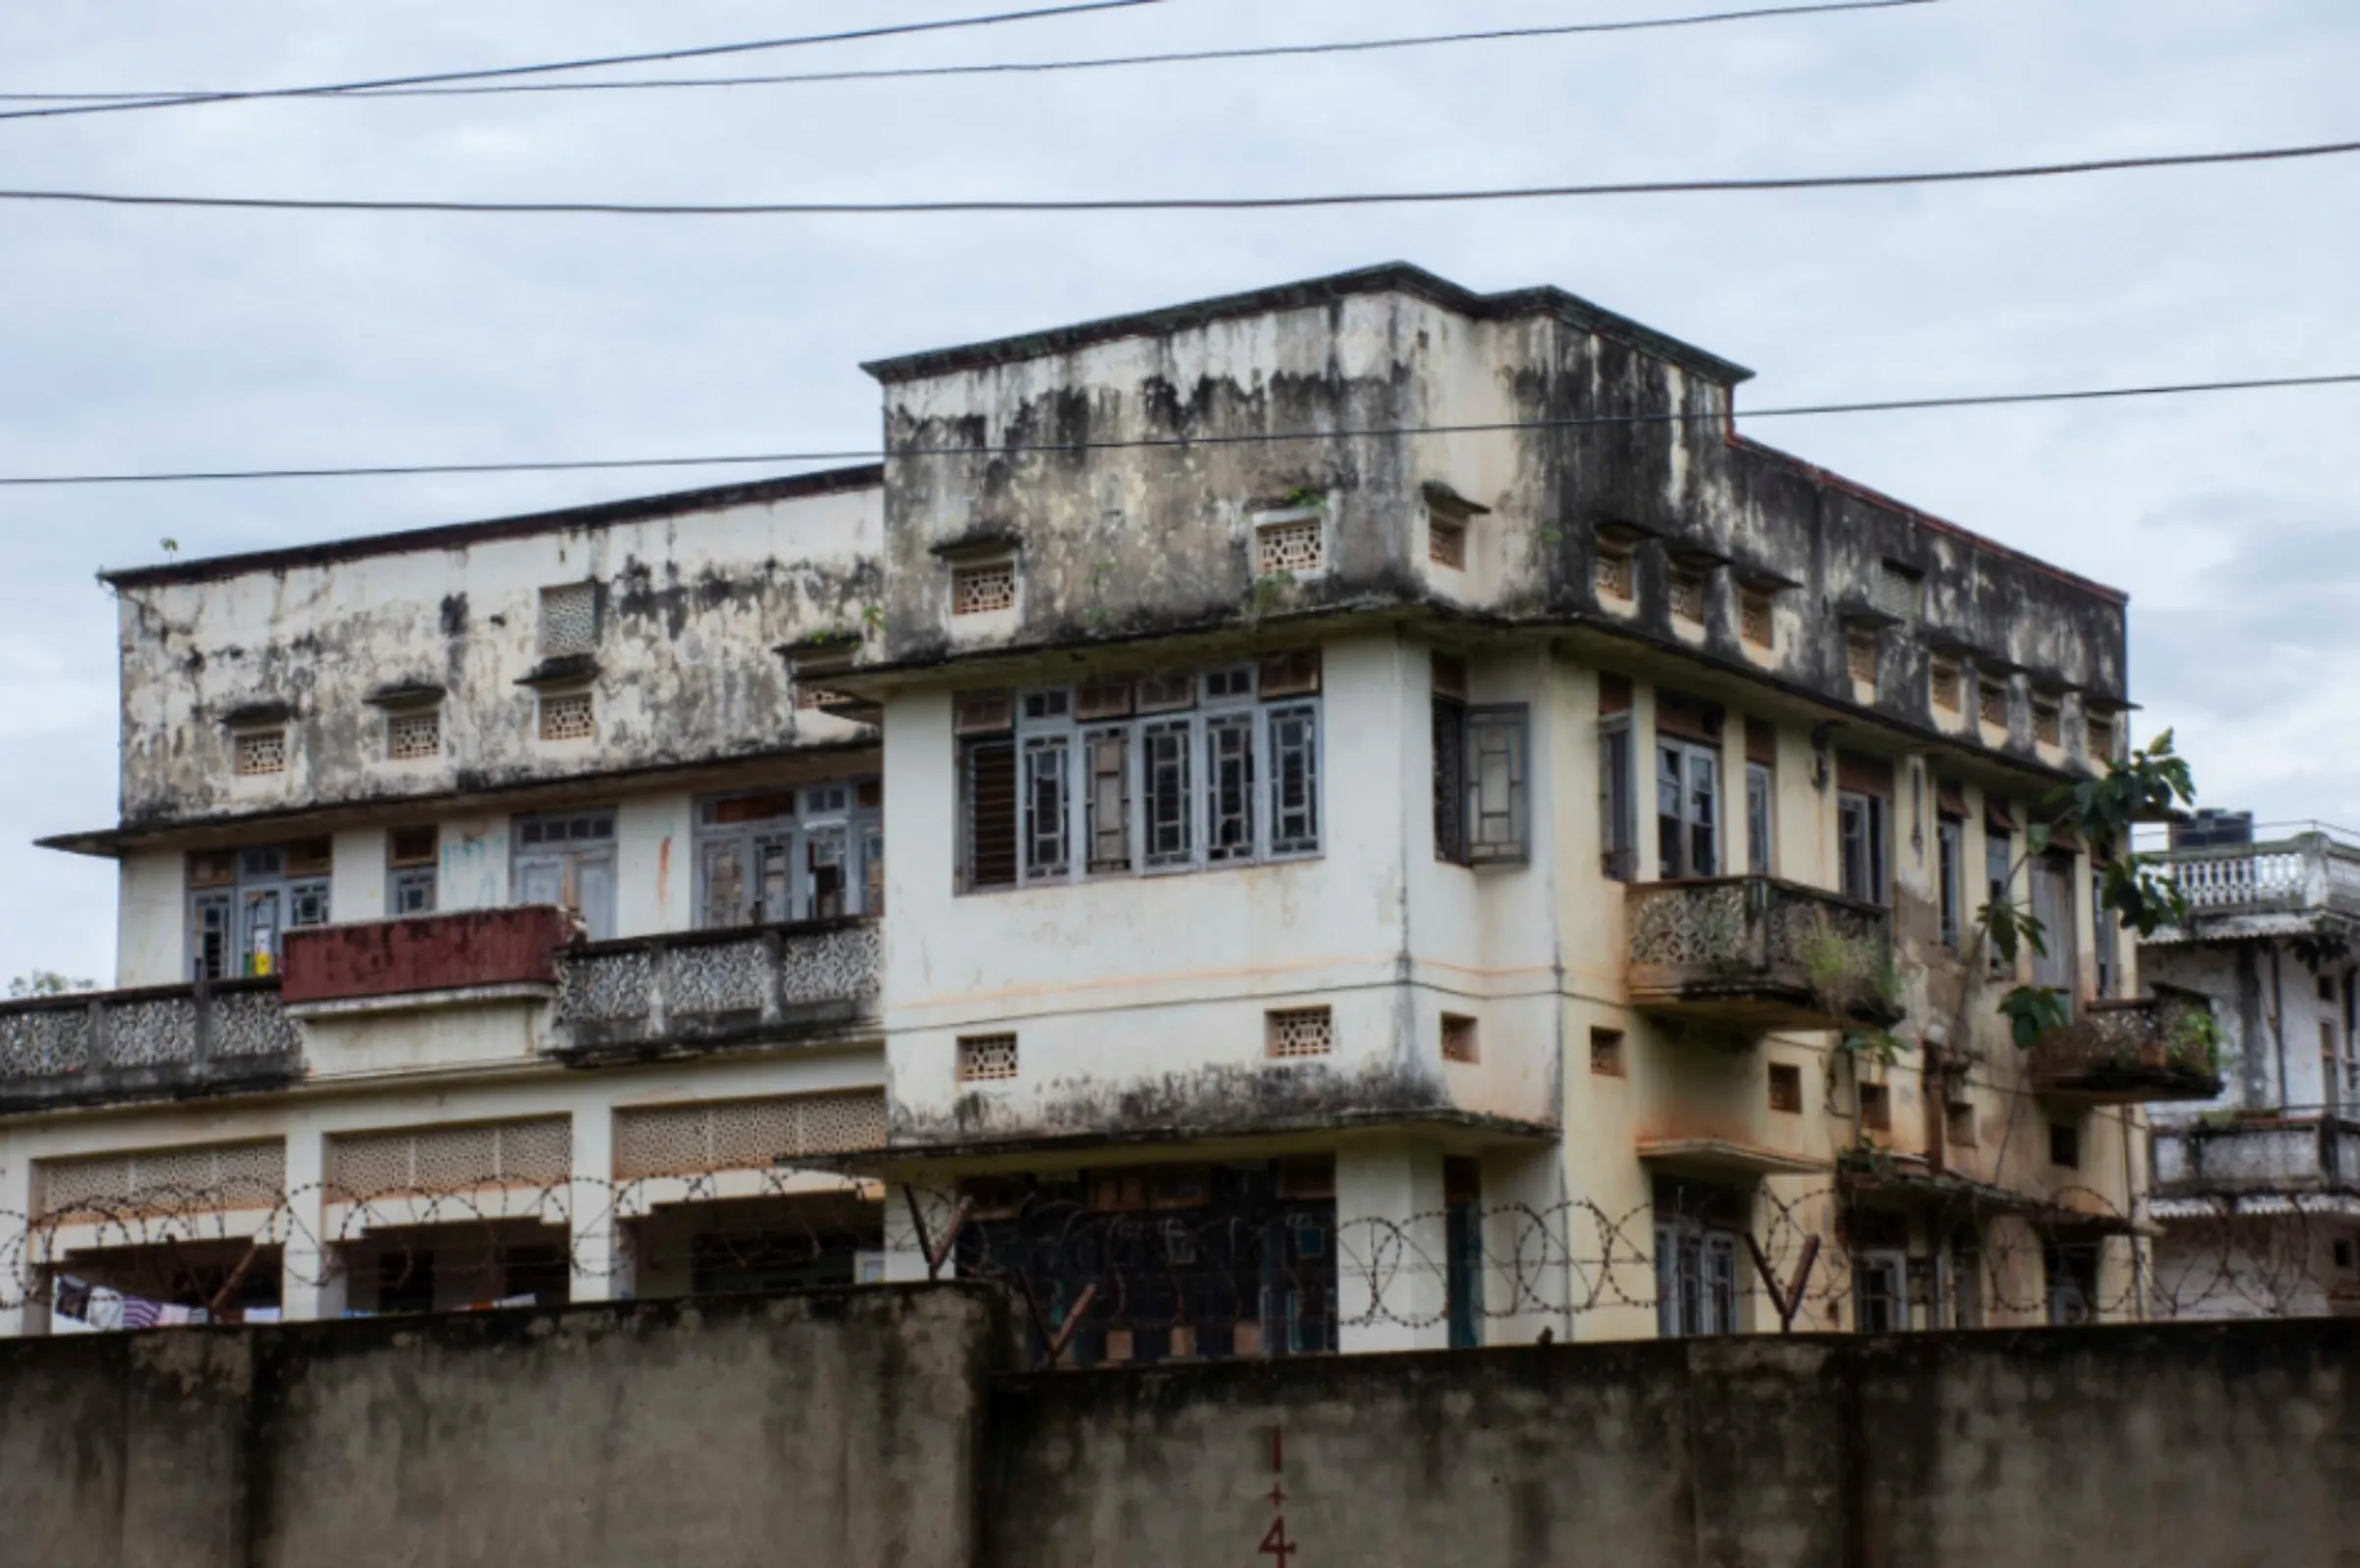 An old Indian building is pictured in Jinja District, Uganda, October 1, 2022